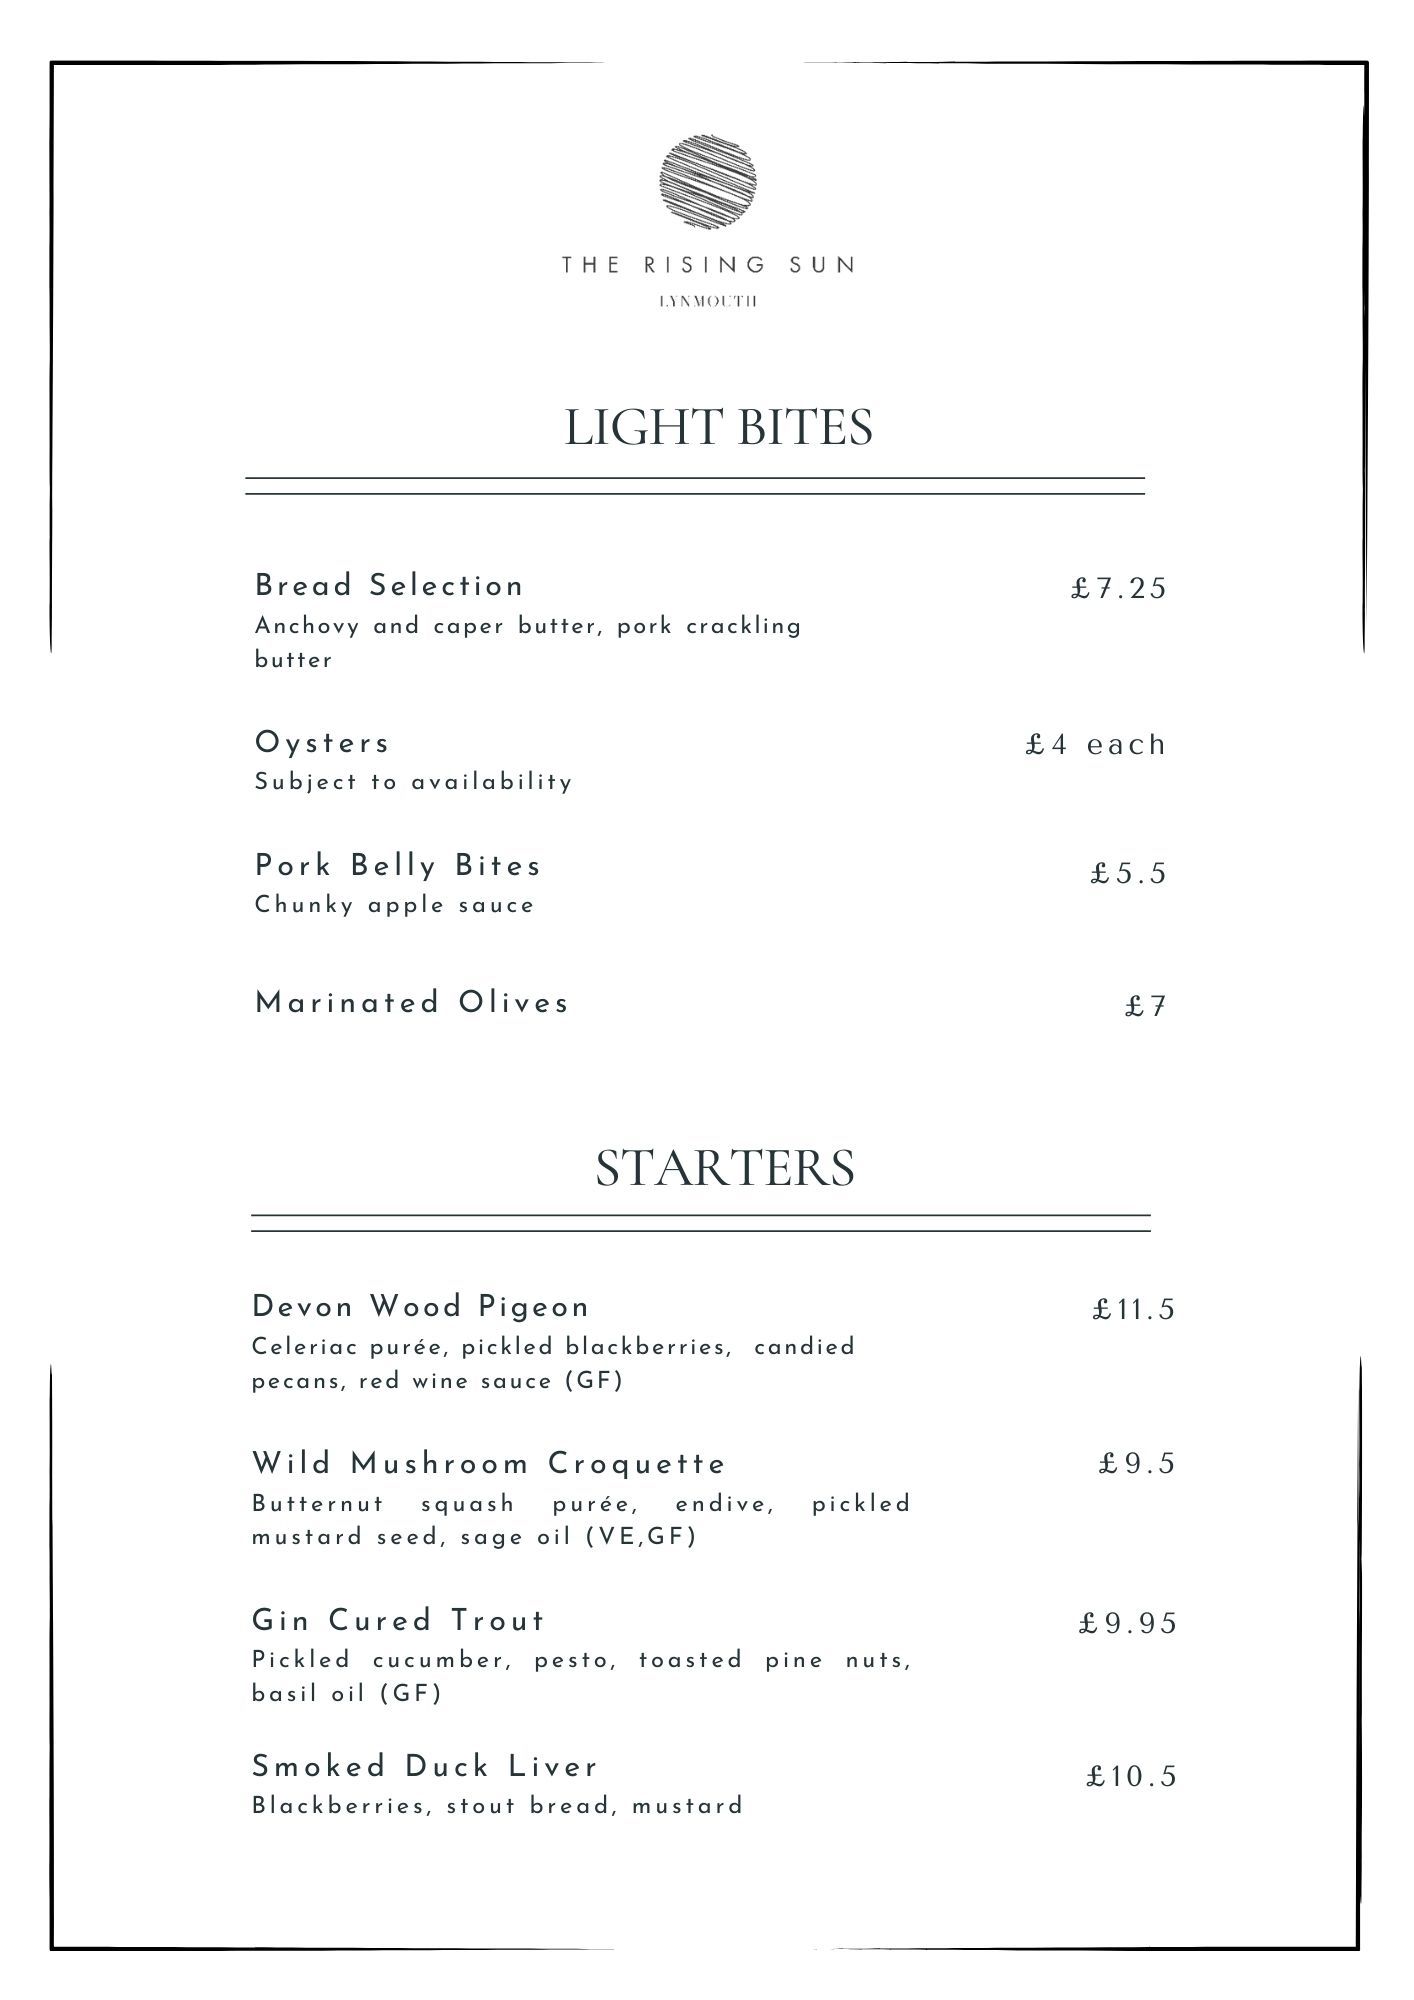 Light bites and starters on the Sunday menu at The Rising Sun Hotel.